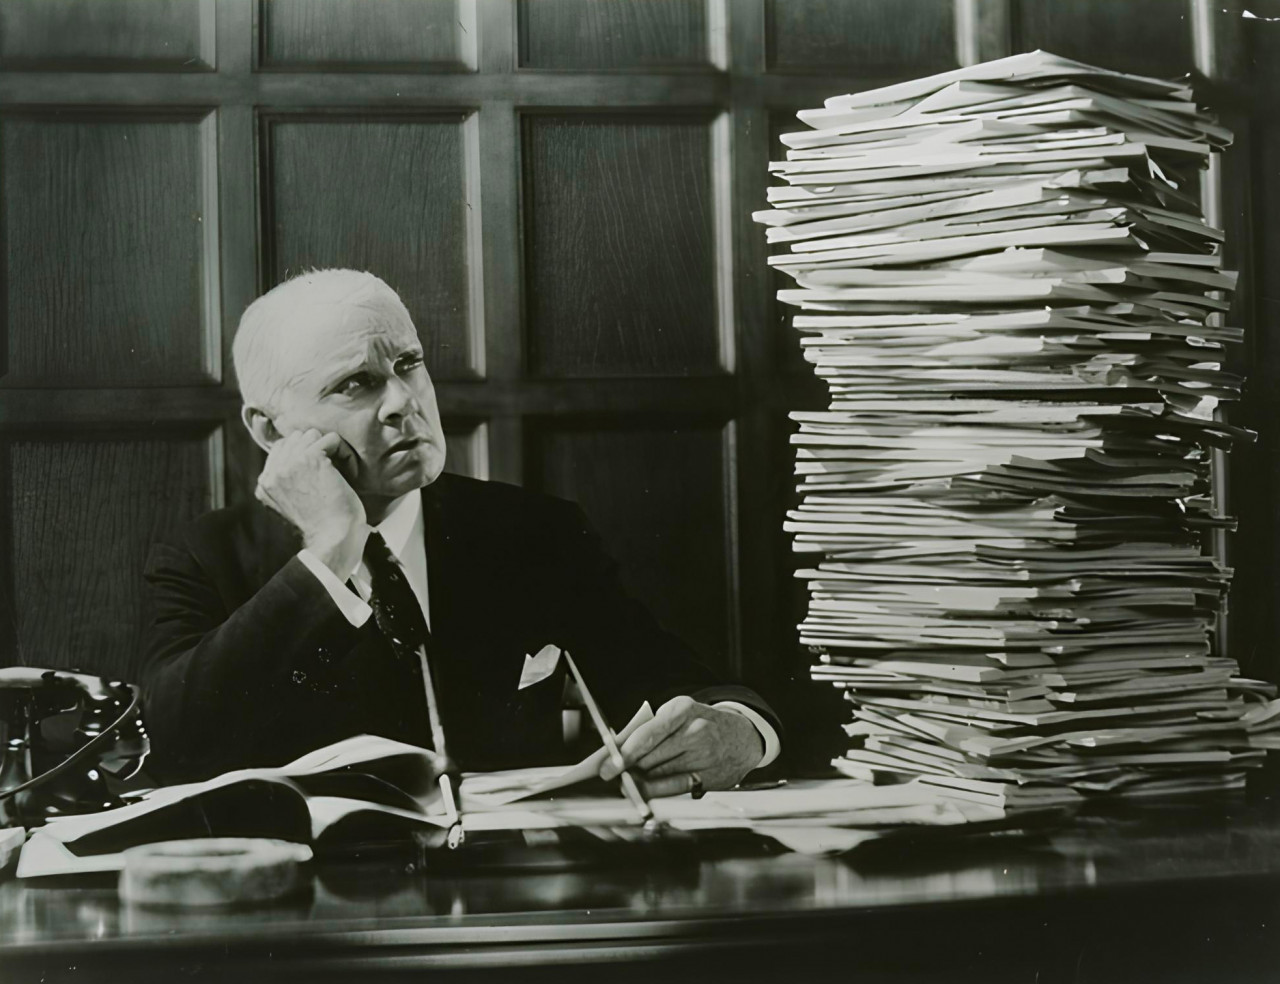 An old black and white photograph of a man at a desk, staring at a huge stack of papers.